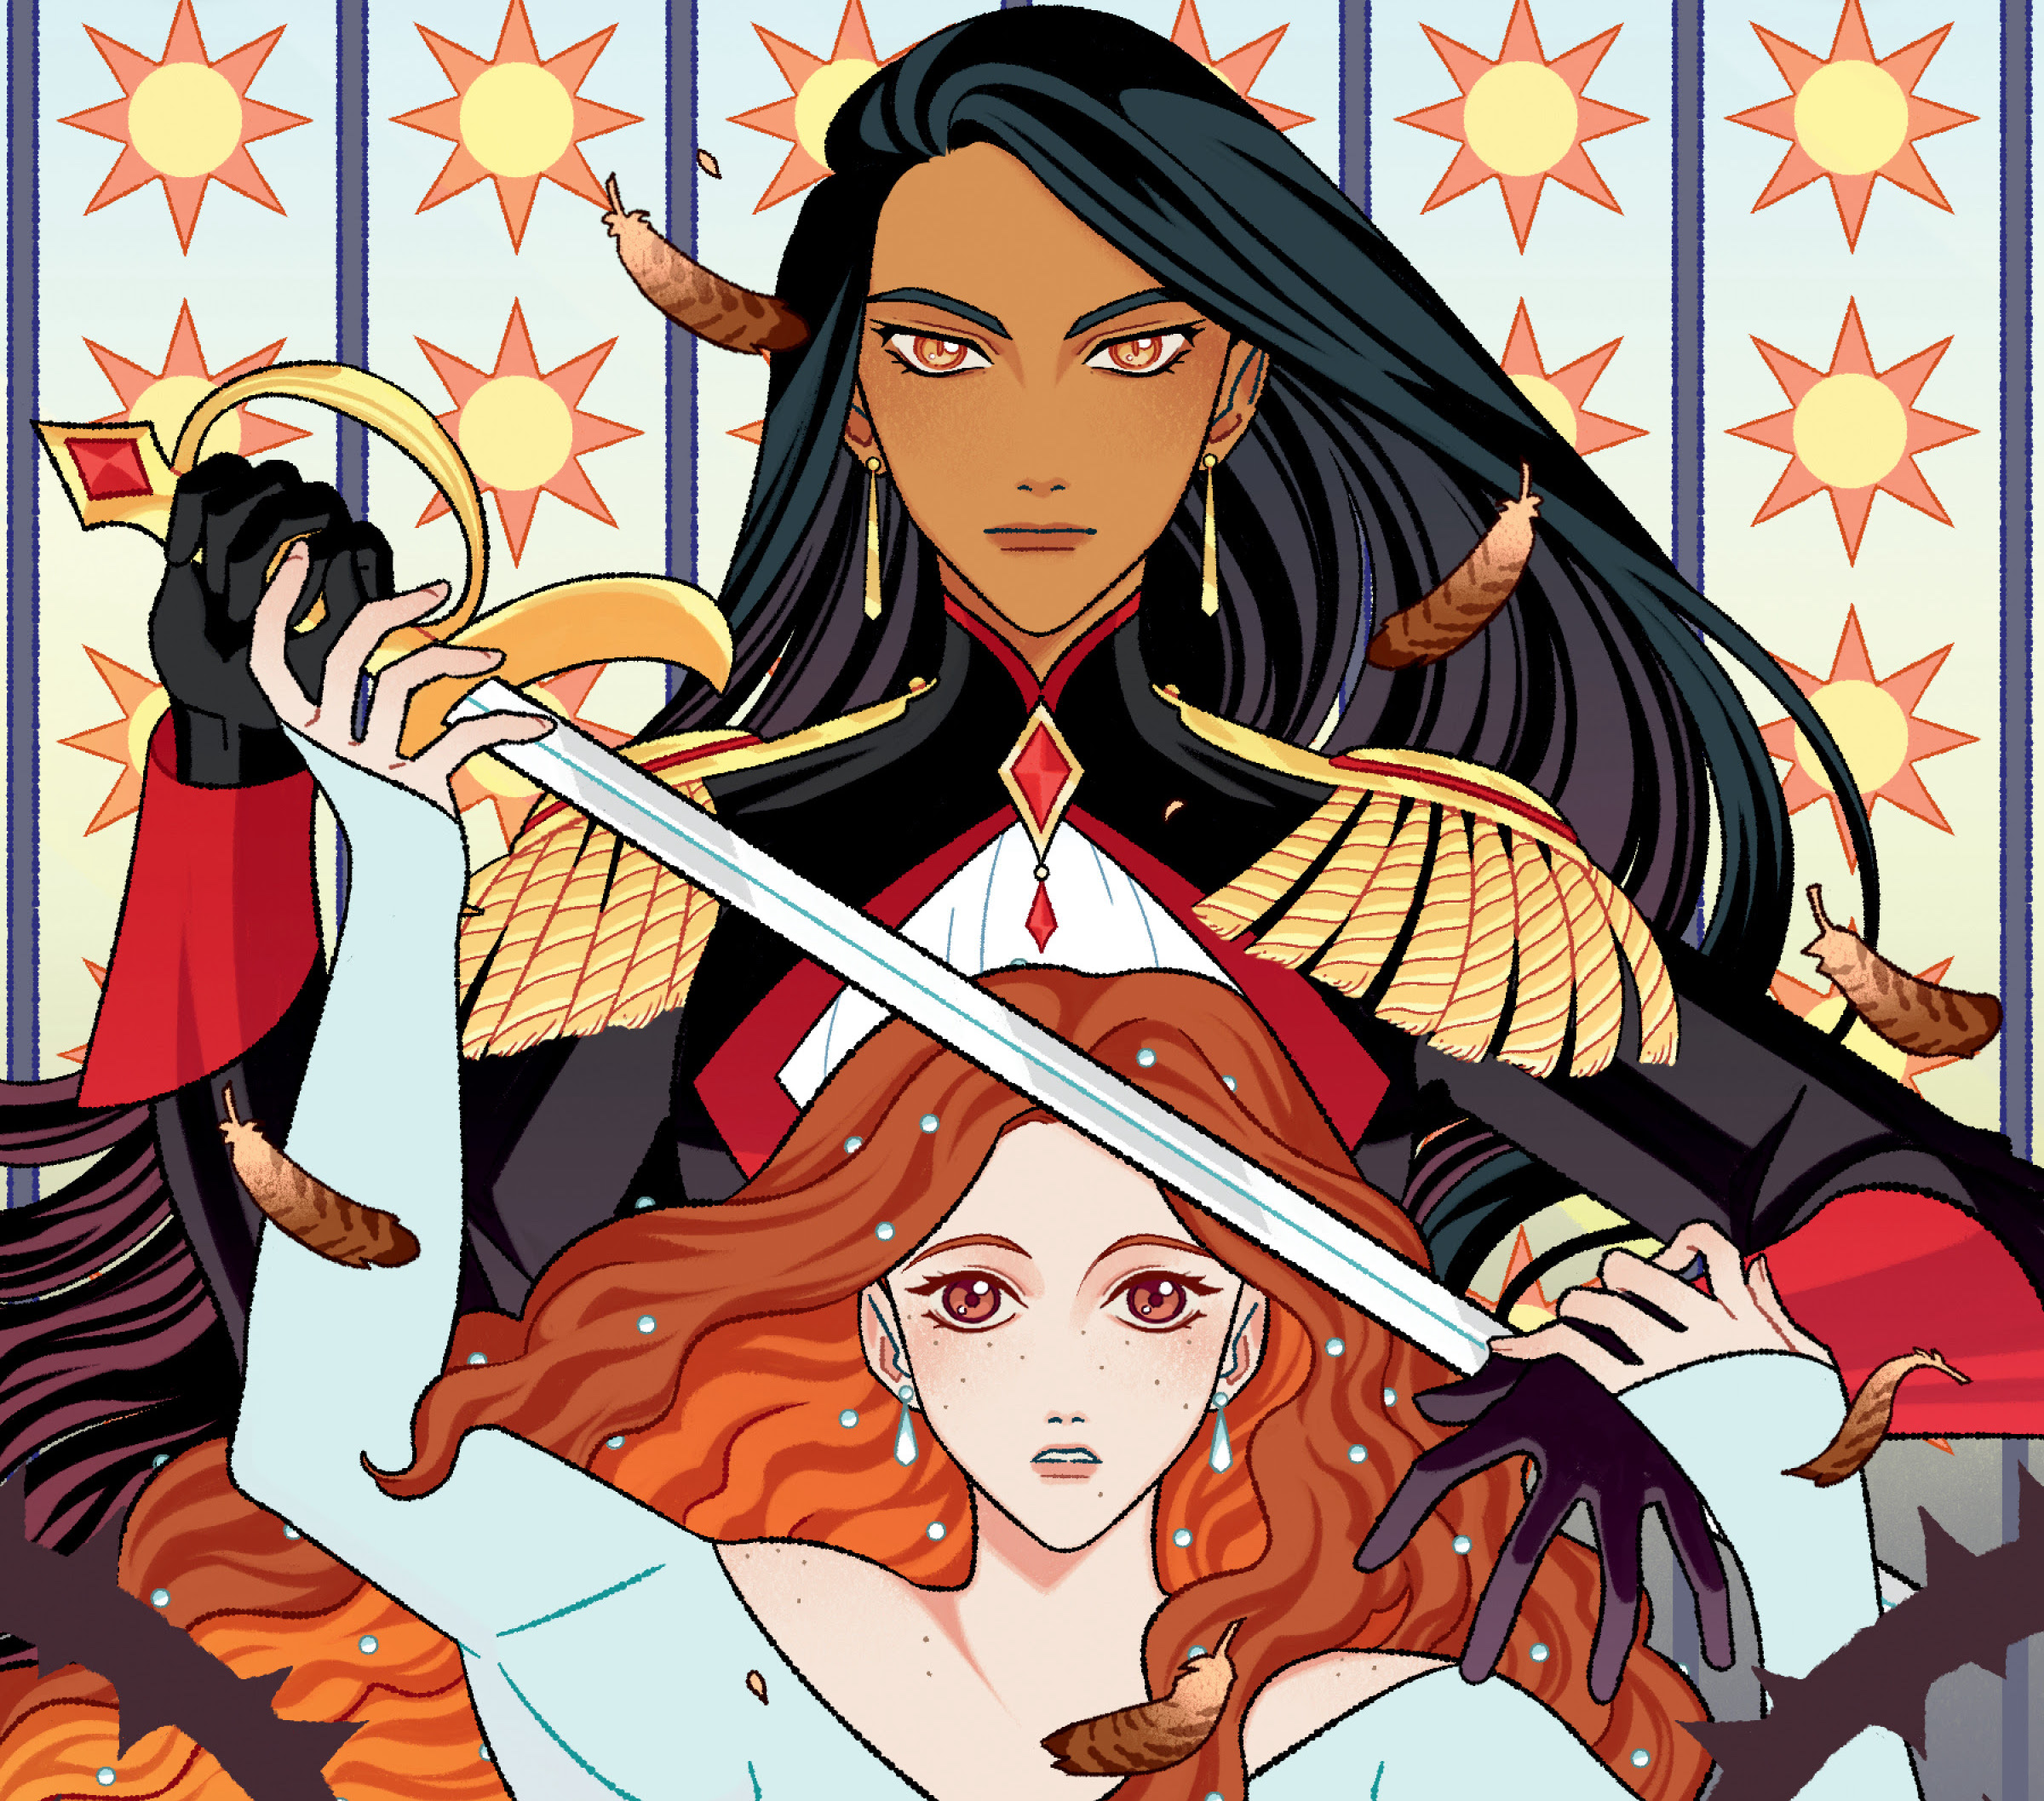 Romantic fantasy 'The Marble Queen' OGN coming November 2022